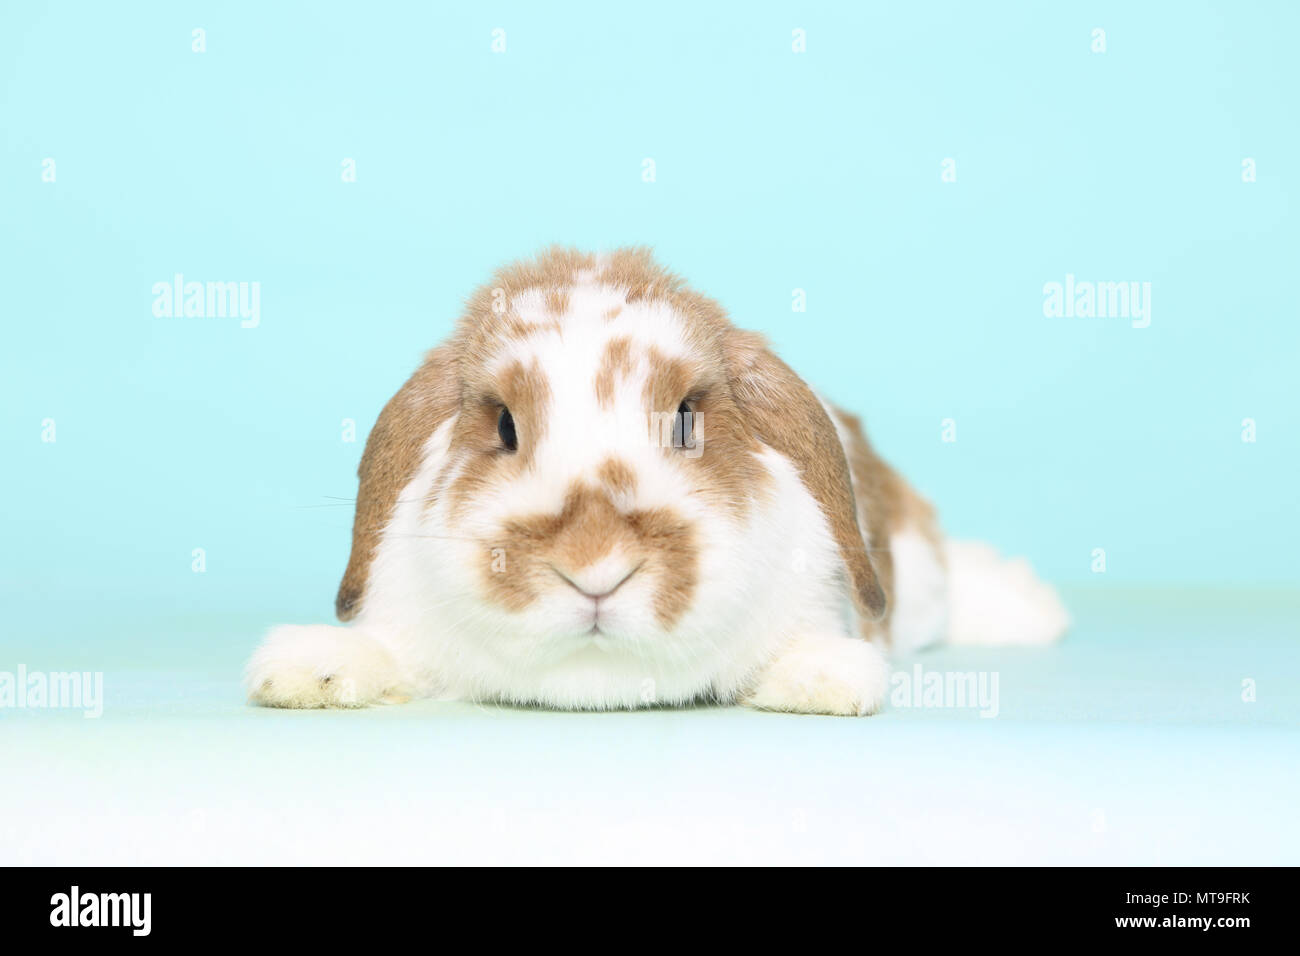 Dwarf Lop-eared Rabbit lying, seen head-on. Studio picture against a light blue background Stock Photo